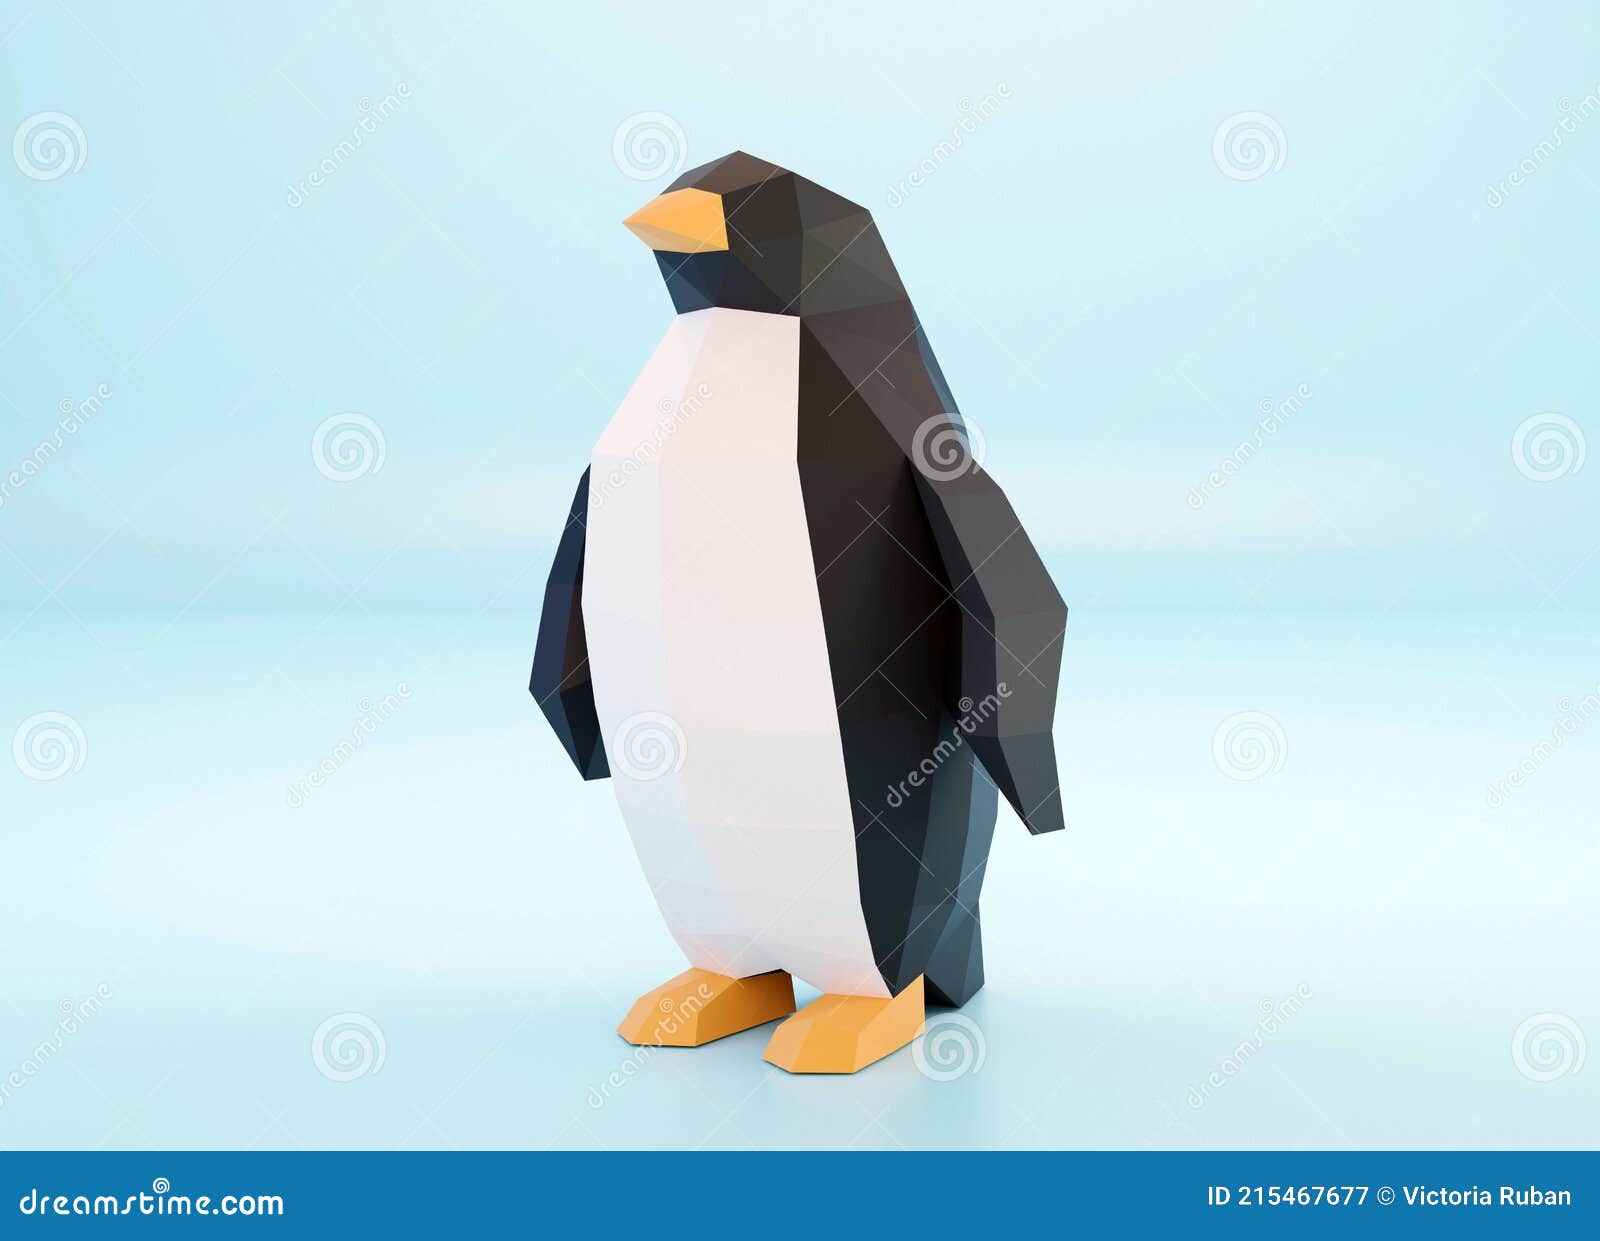 Paper Sculpture of a Polygonal Penguin, Folded Paper Animal, Papercraft,  World Penguin Day Stock Illustration - Illustration of craft, polygon:  215467677